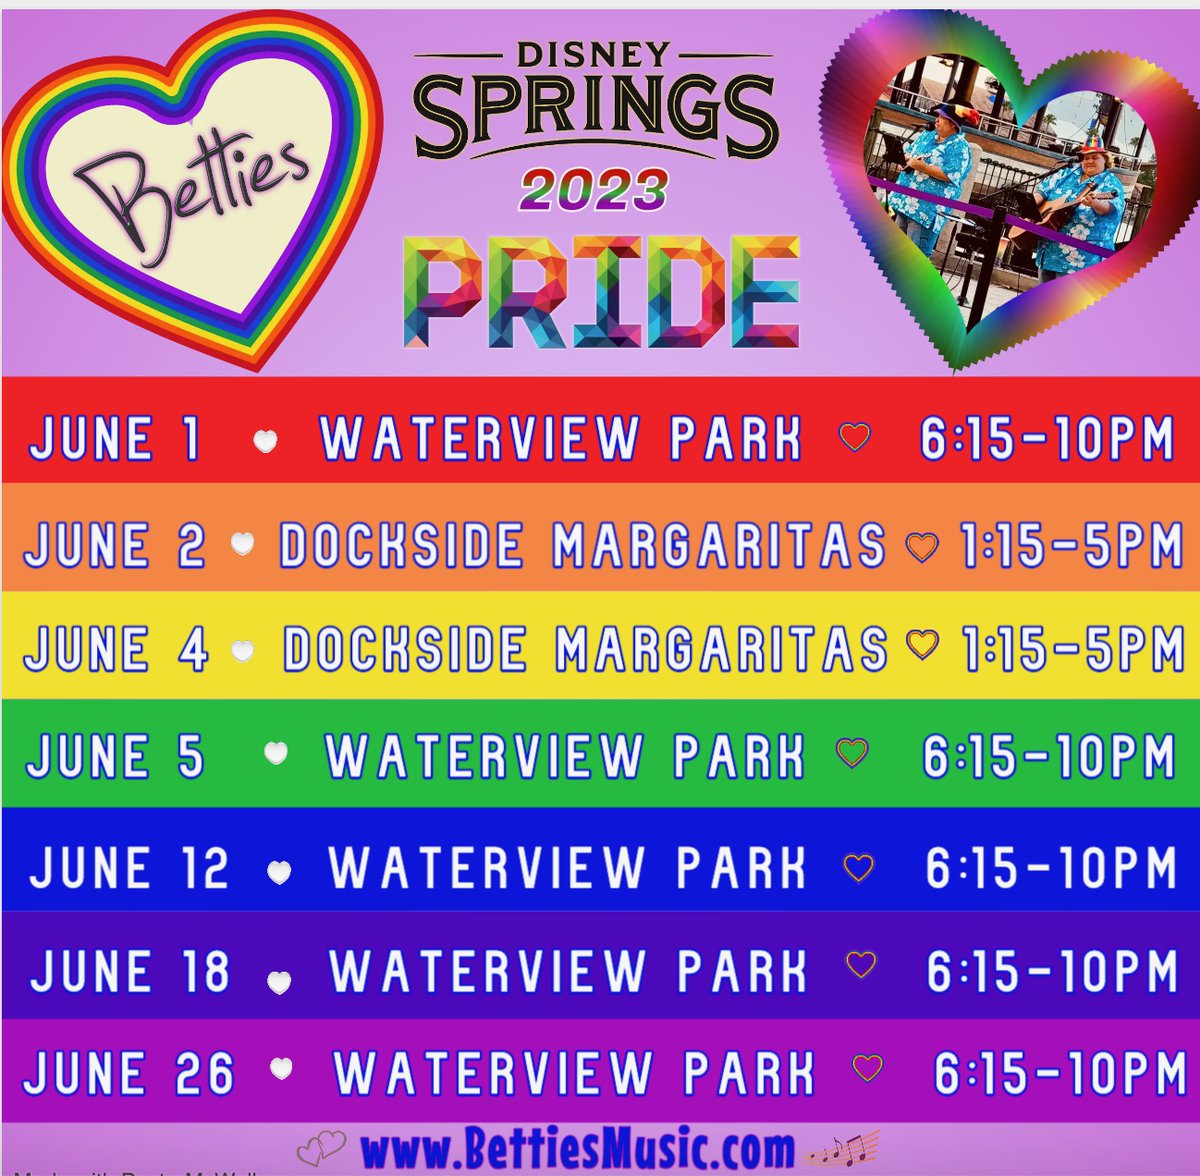 Betties kick off Pride Month this Thursday, June 1st at Disney Springs at the Waterview Park Stage (between Hangar Bar & the Boathouse) from 6:15-10pm! 🏳️‍🌈 You can also catch us at Waterview again 6/5, 6/12, 6/18, and 6/26. Plus at Dockside Margaritas on 6/2 & 6/4 from 1:15-5pm🎶